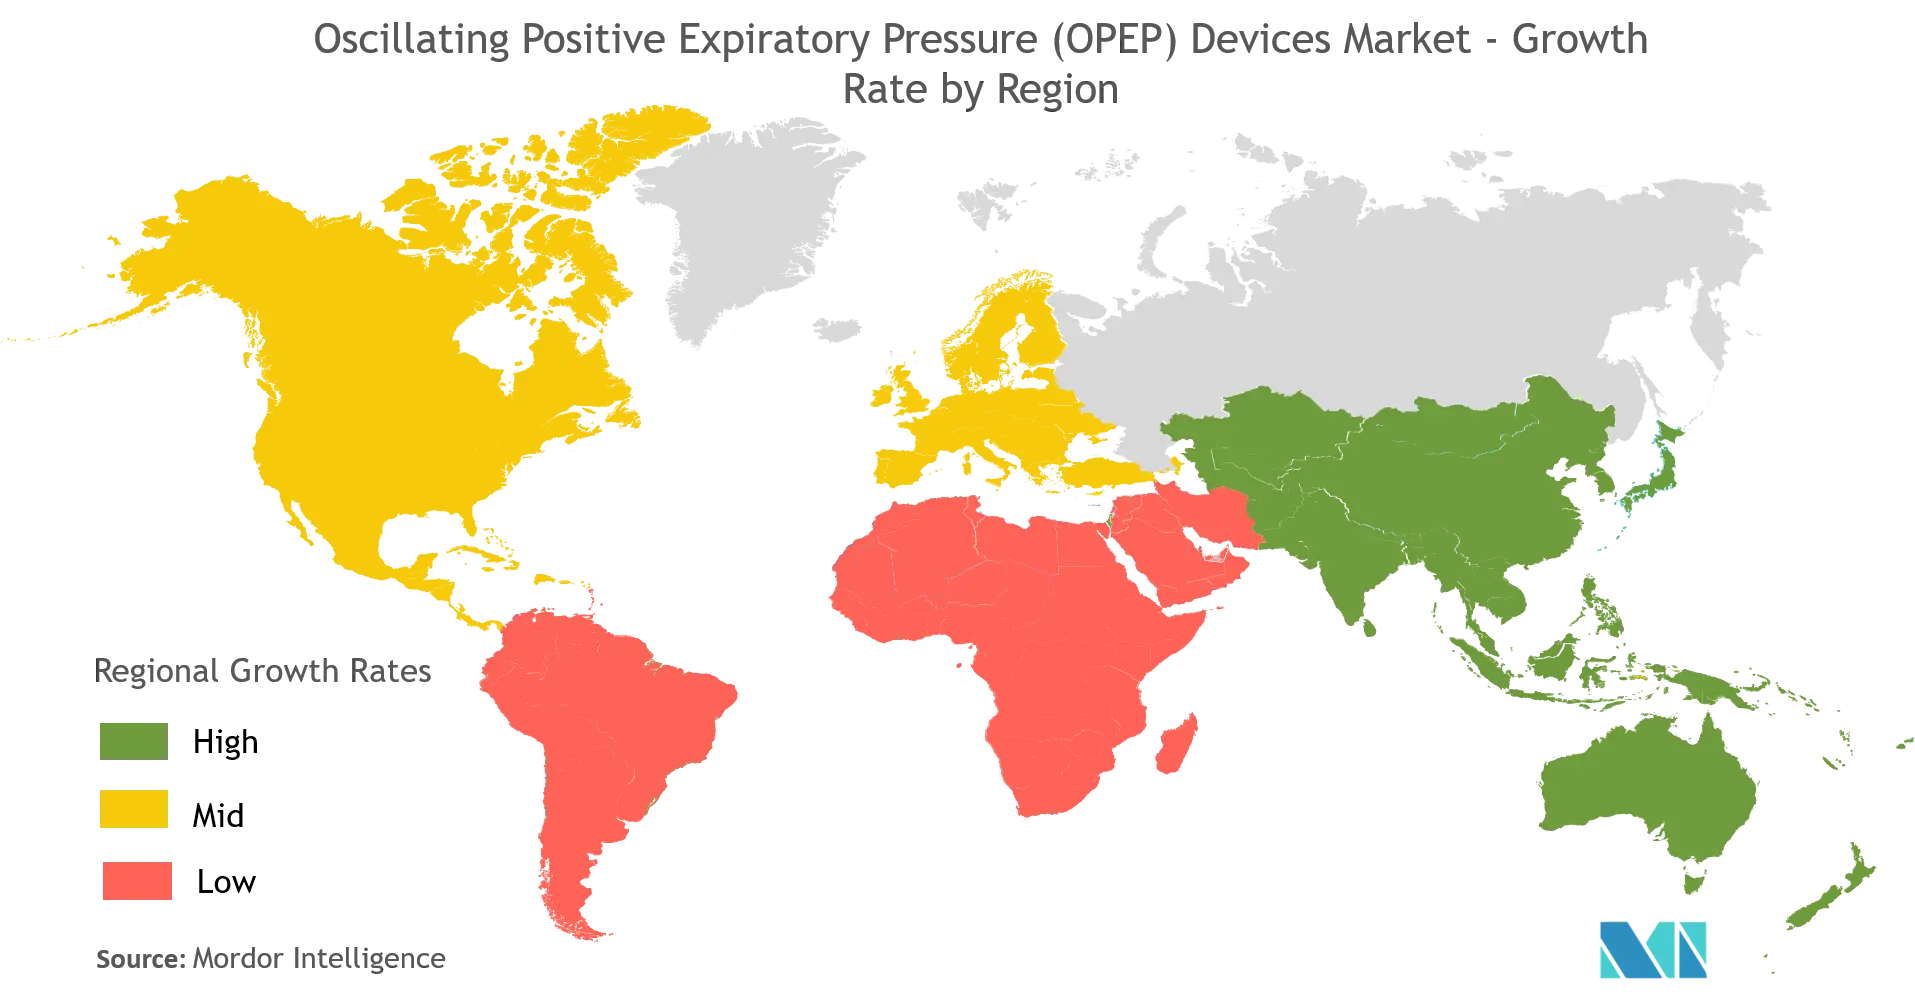 Oscillating Positive Expiratory Pressure (OPEP) Devices Market Growth